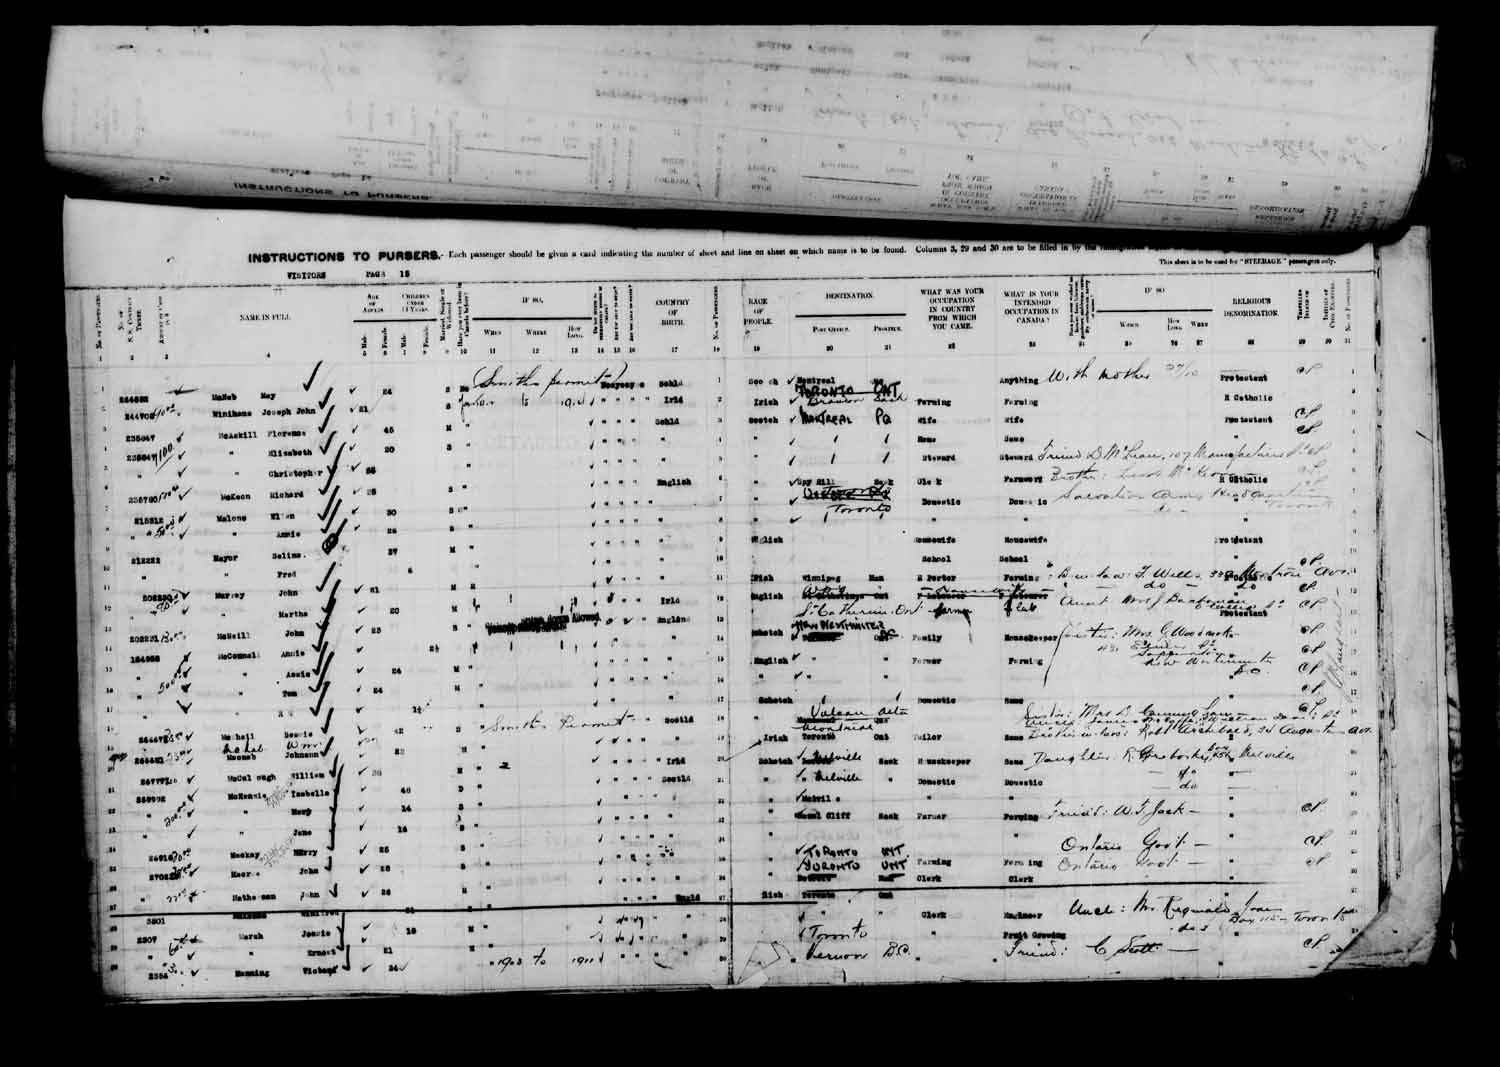 Digitized page of Passenger Lists for Image No.: e003610655